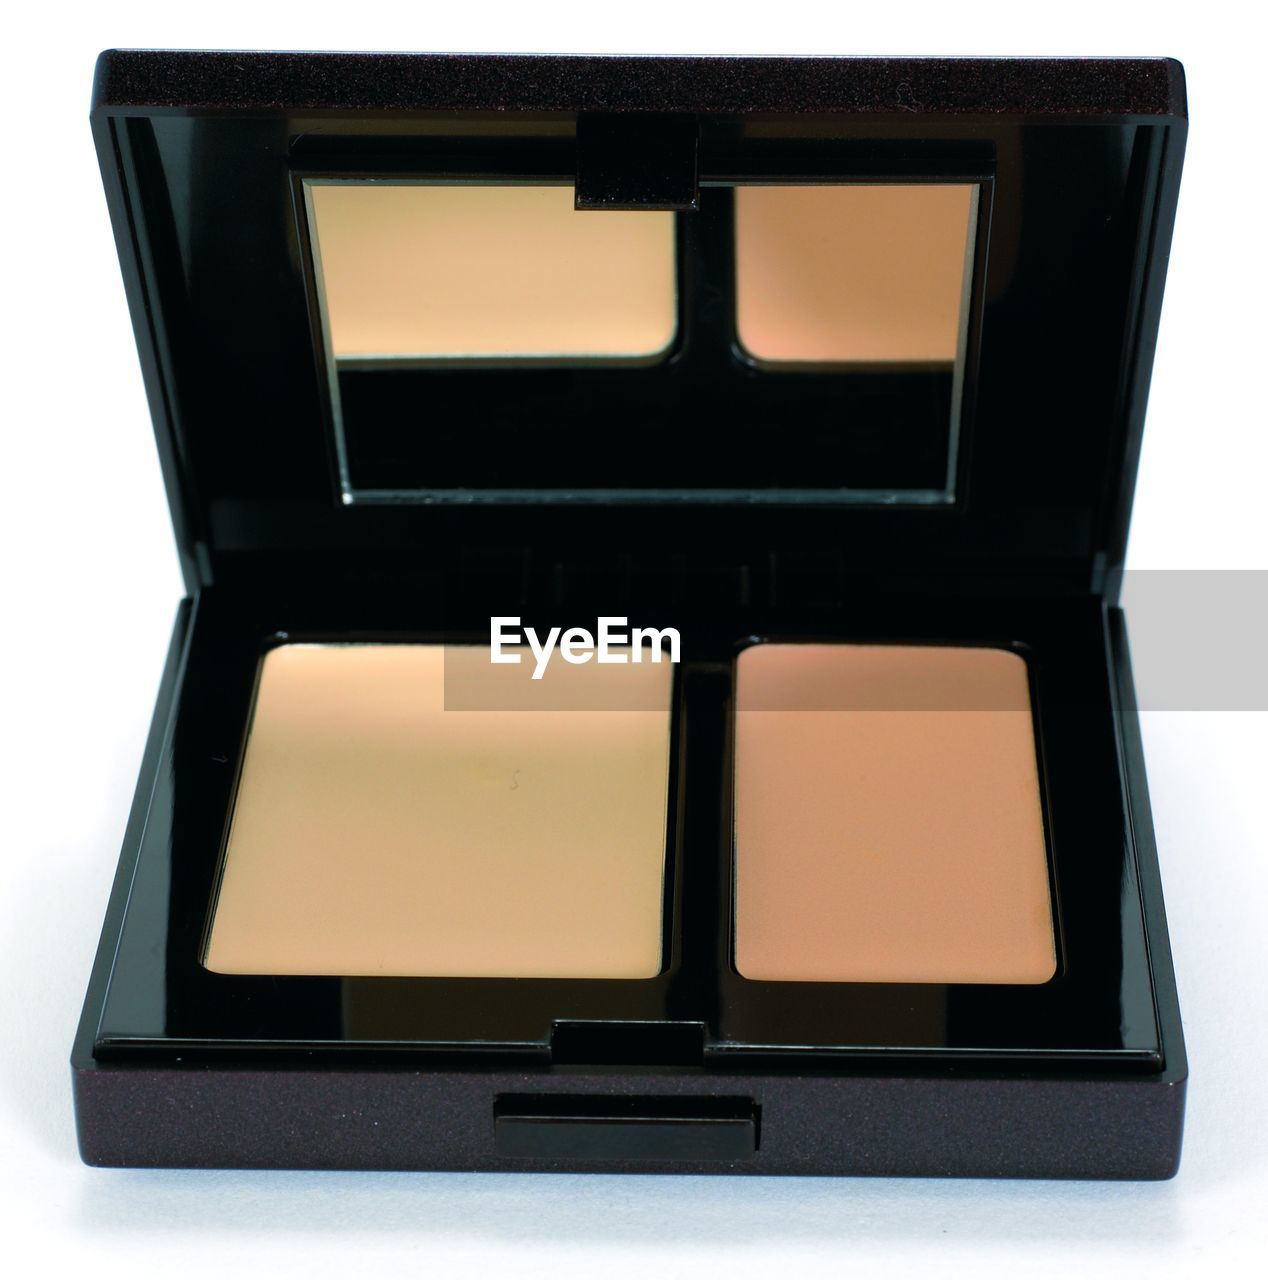 Make-up Makeup Mirror Beauty Compact Cream Foundation Cut Out On White With Shadows Fashion&love&beauty Indoors  Make Up Pallete No People Studio Shot Two Tones White Background